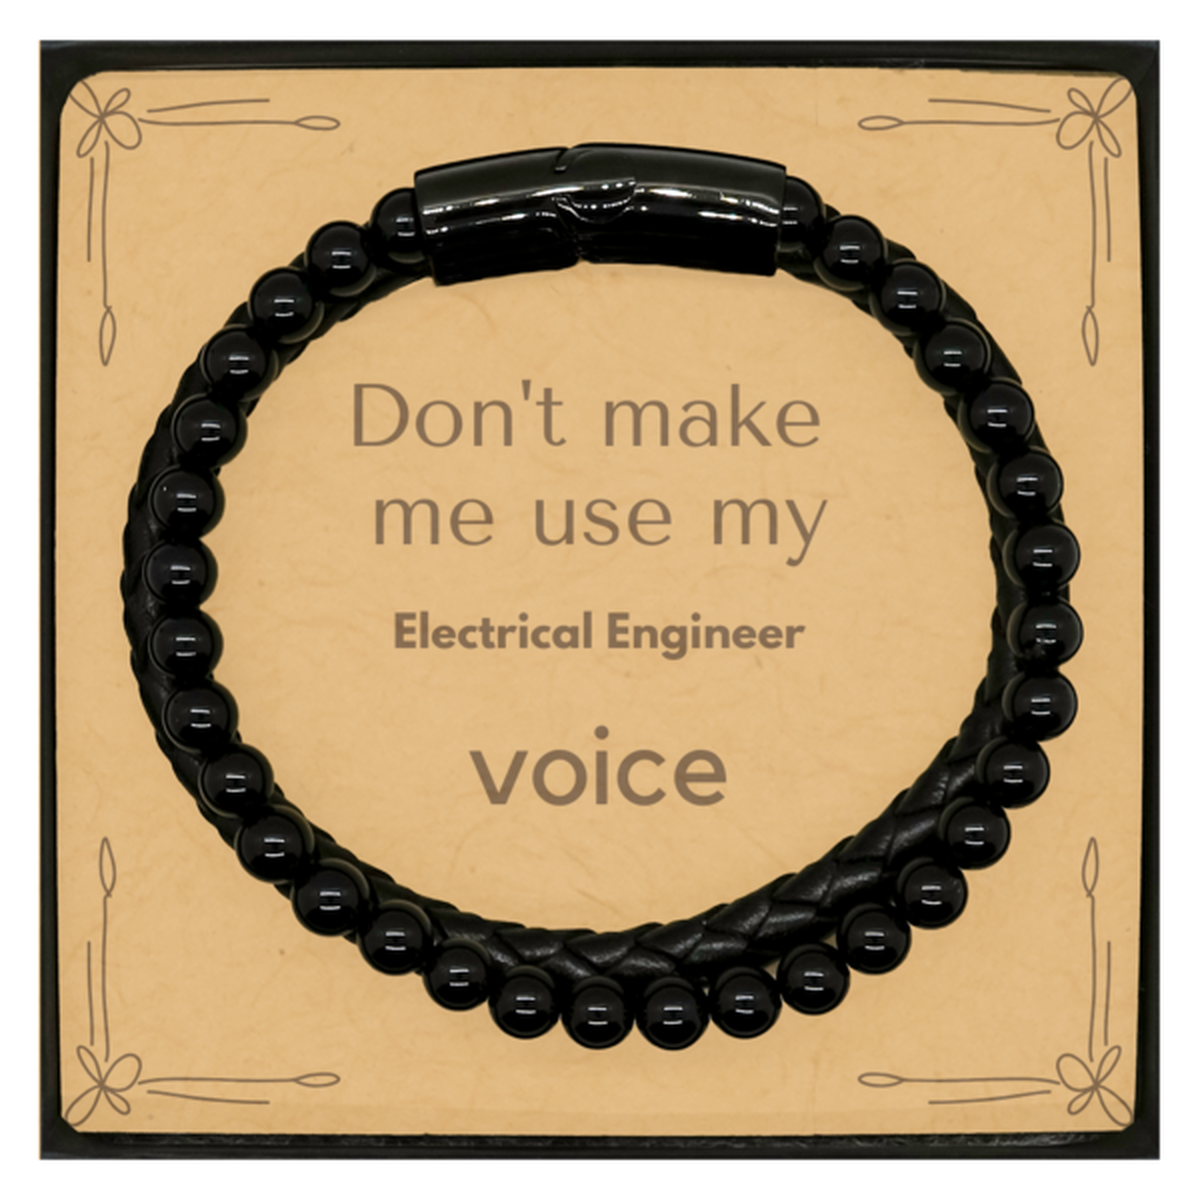 Don't make me use my Electrical Engineer voice, Sarcasm Electrical Engineer Card Gifts, Christmas Electrical Engineer Stone Leather Bracelets Birthday Unique Gifts For Electrical Engineer Coworkers, Men, Women, Colleague, Friends